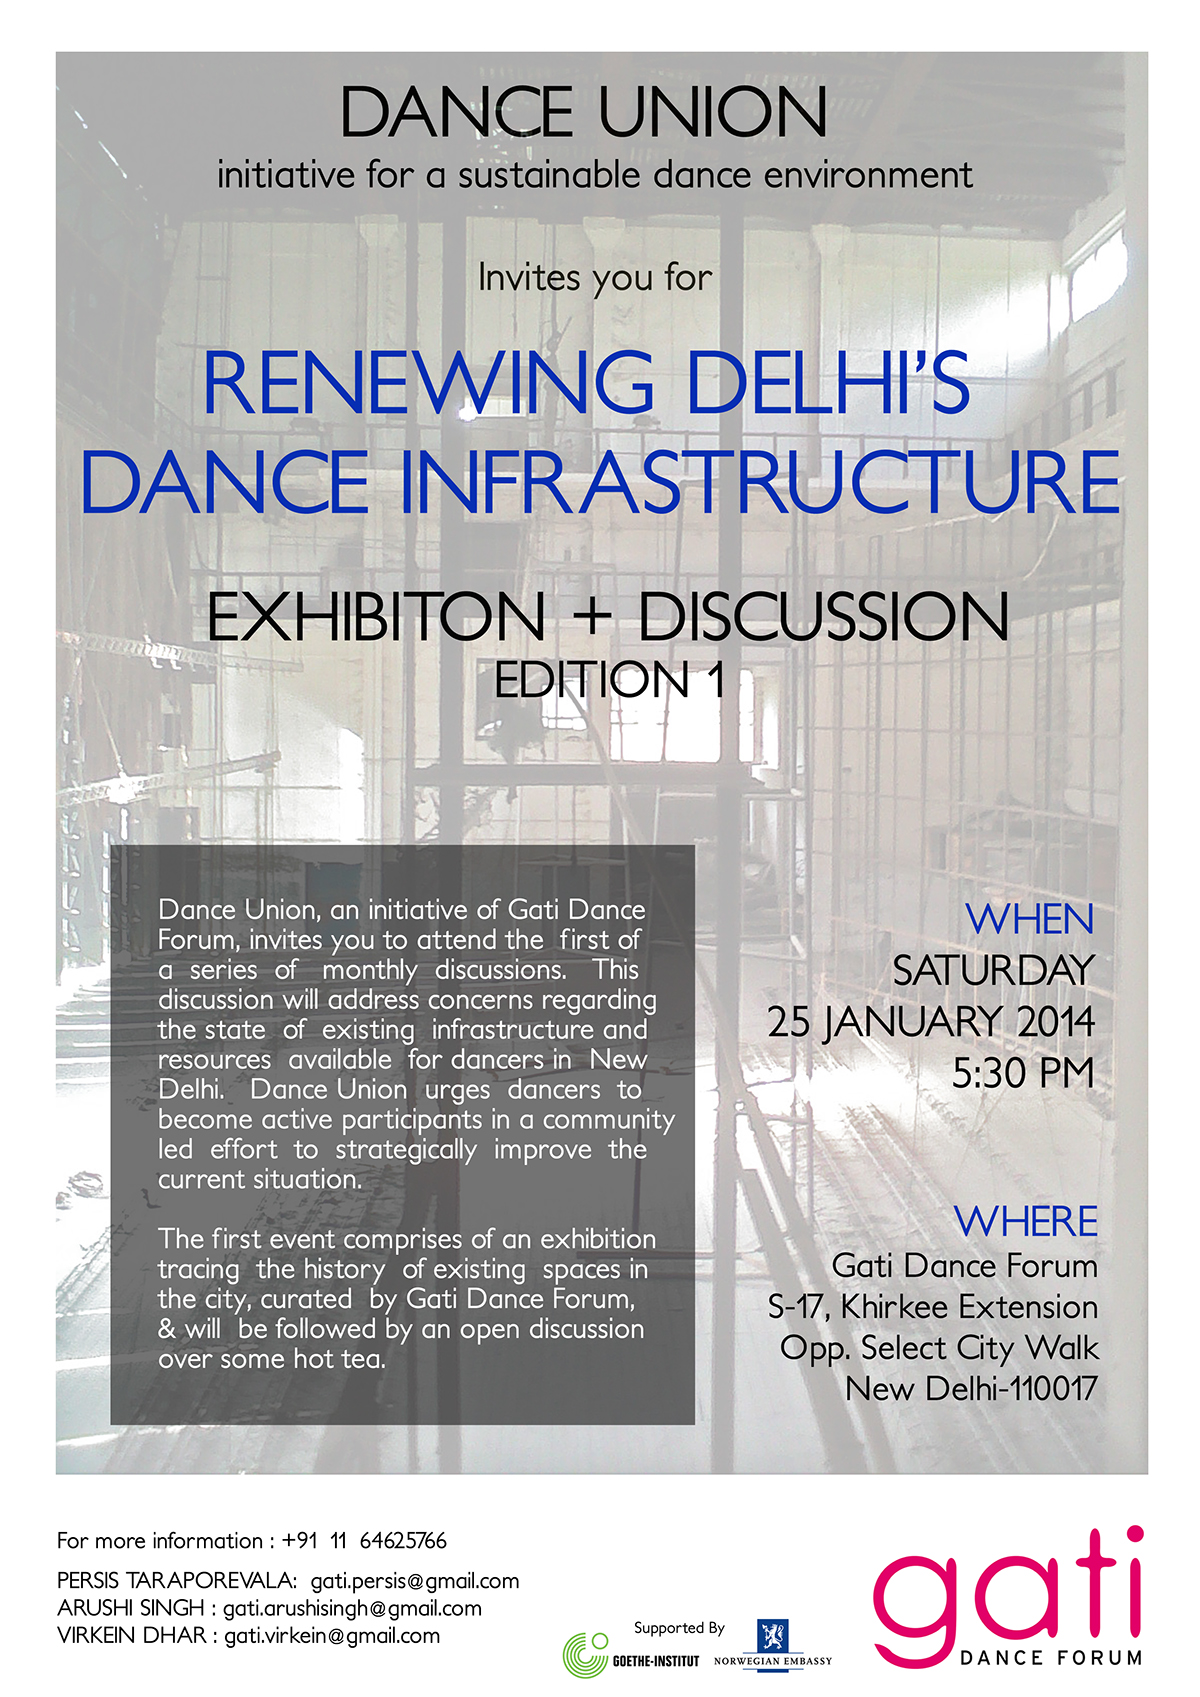 culture policy research infrastructure revitalisation urban renewal DANCE   New Delhi